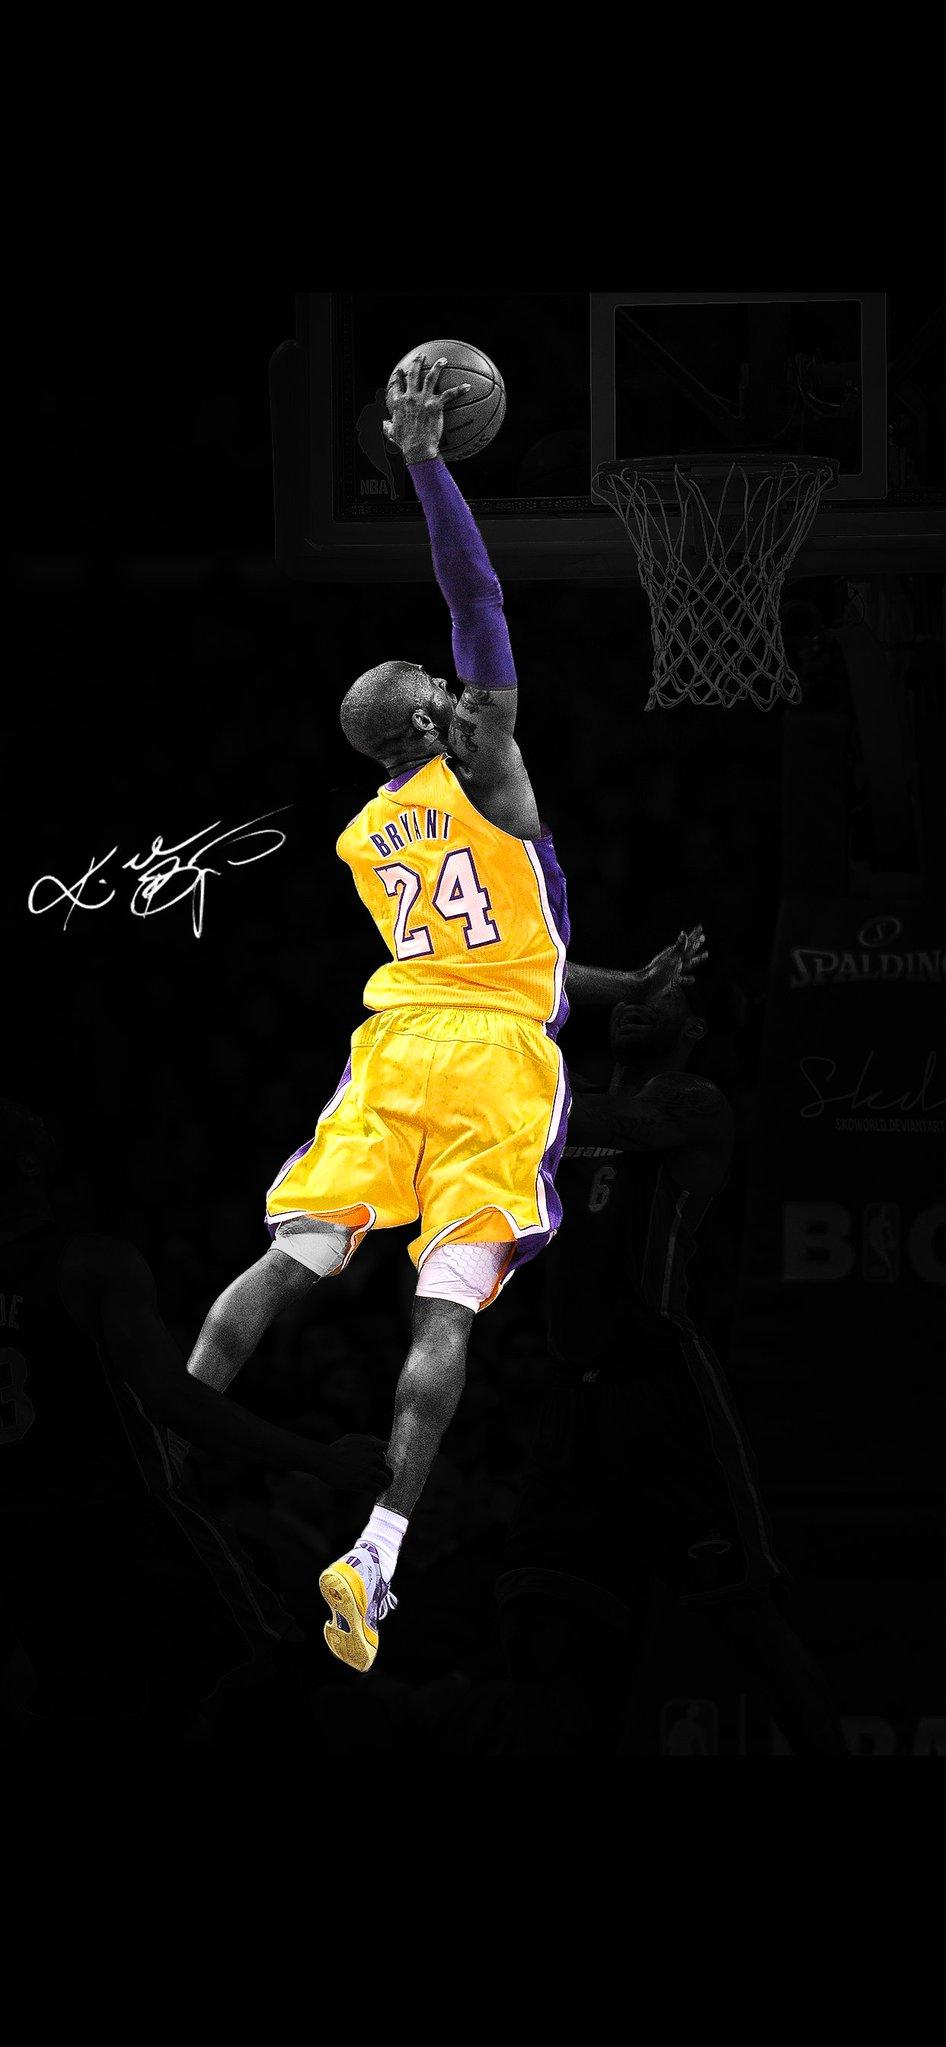 3Wallpapers for iPhone on X iPhone Wallpaper Kobe Byant